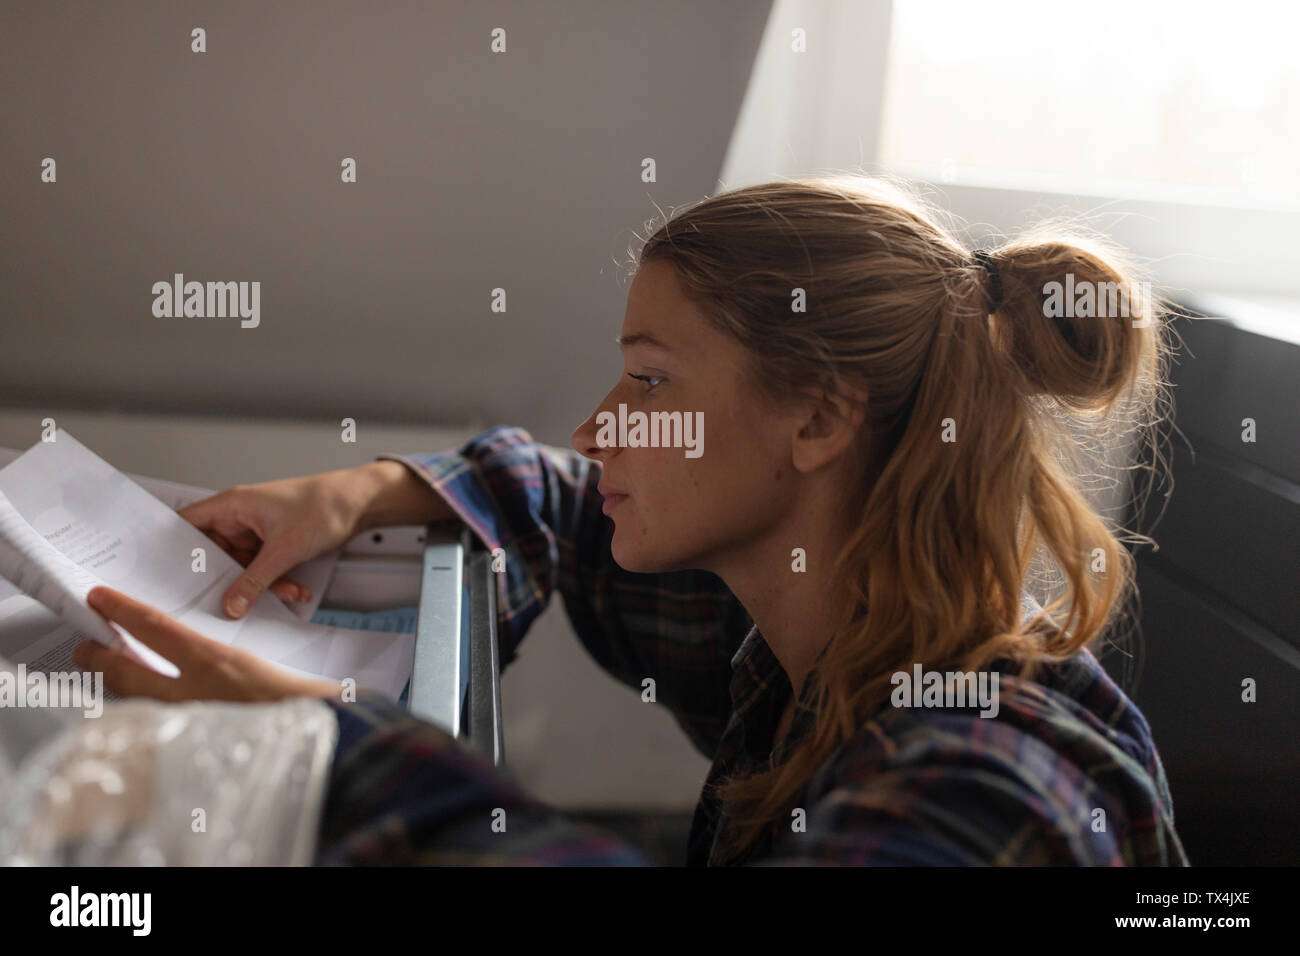 Young woman studying assembly instructions in kitchen Stock Photo